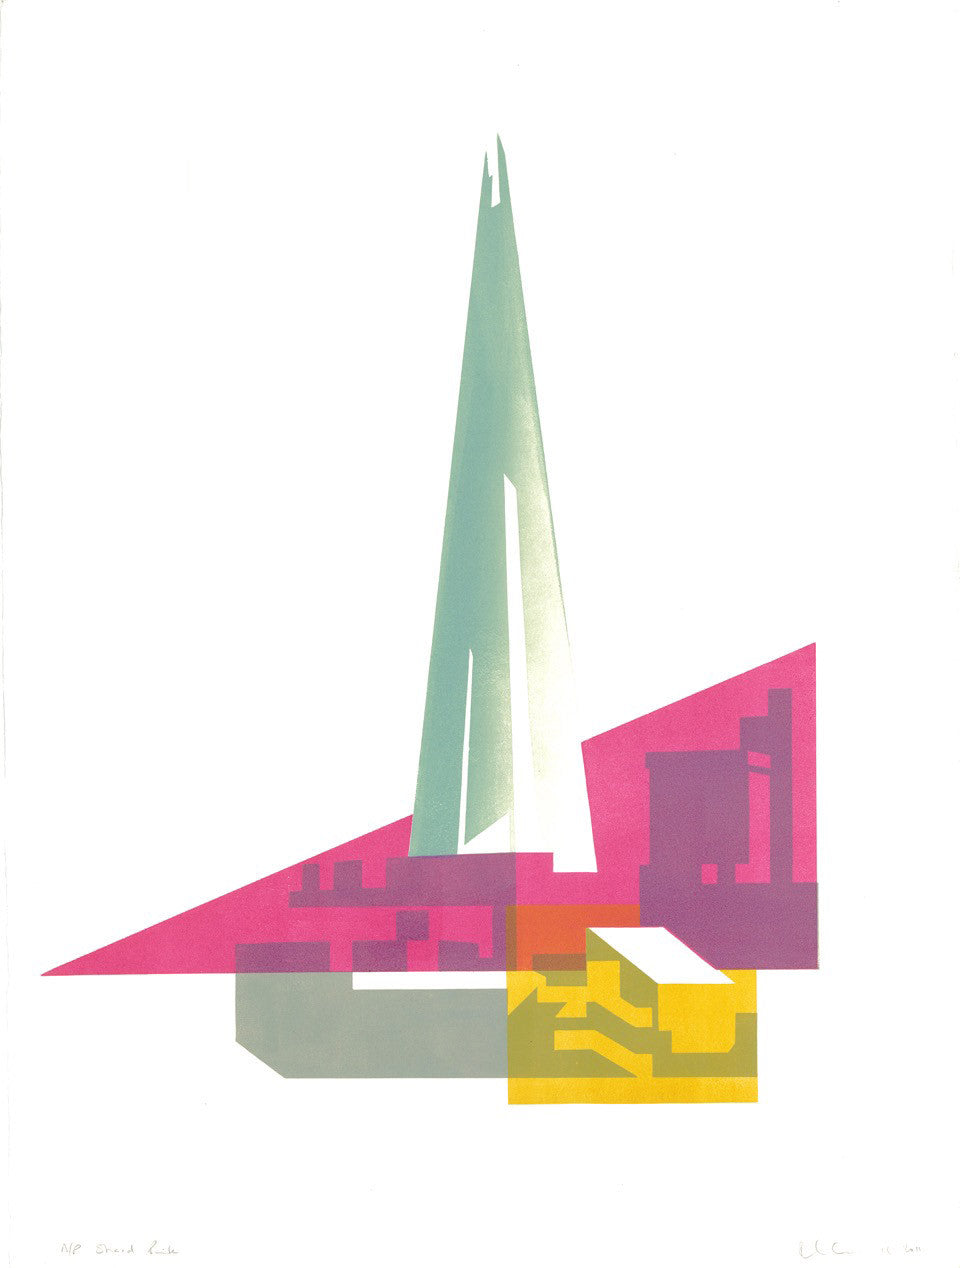 Shard - Pink - Paul Catherall - St. Jude's Prints